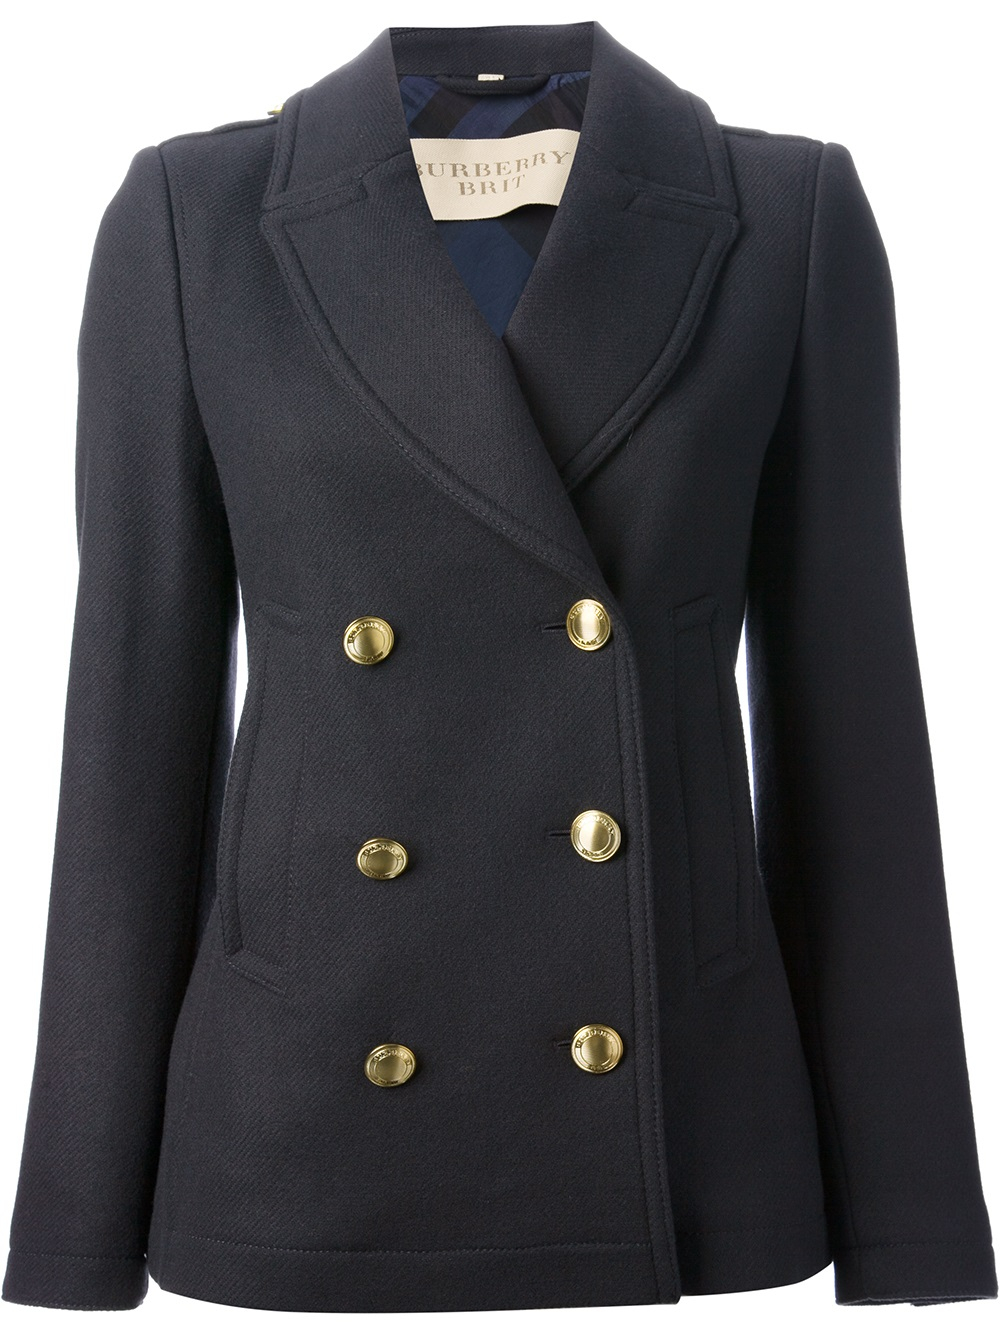 Lyst - Burberry Brit Military Jacket in Blue